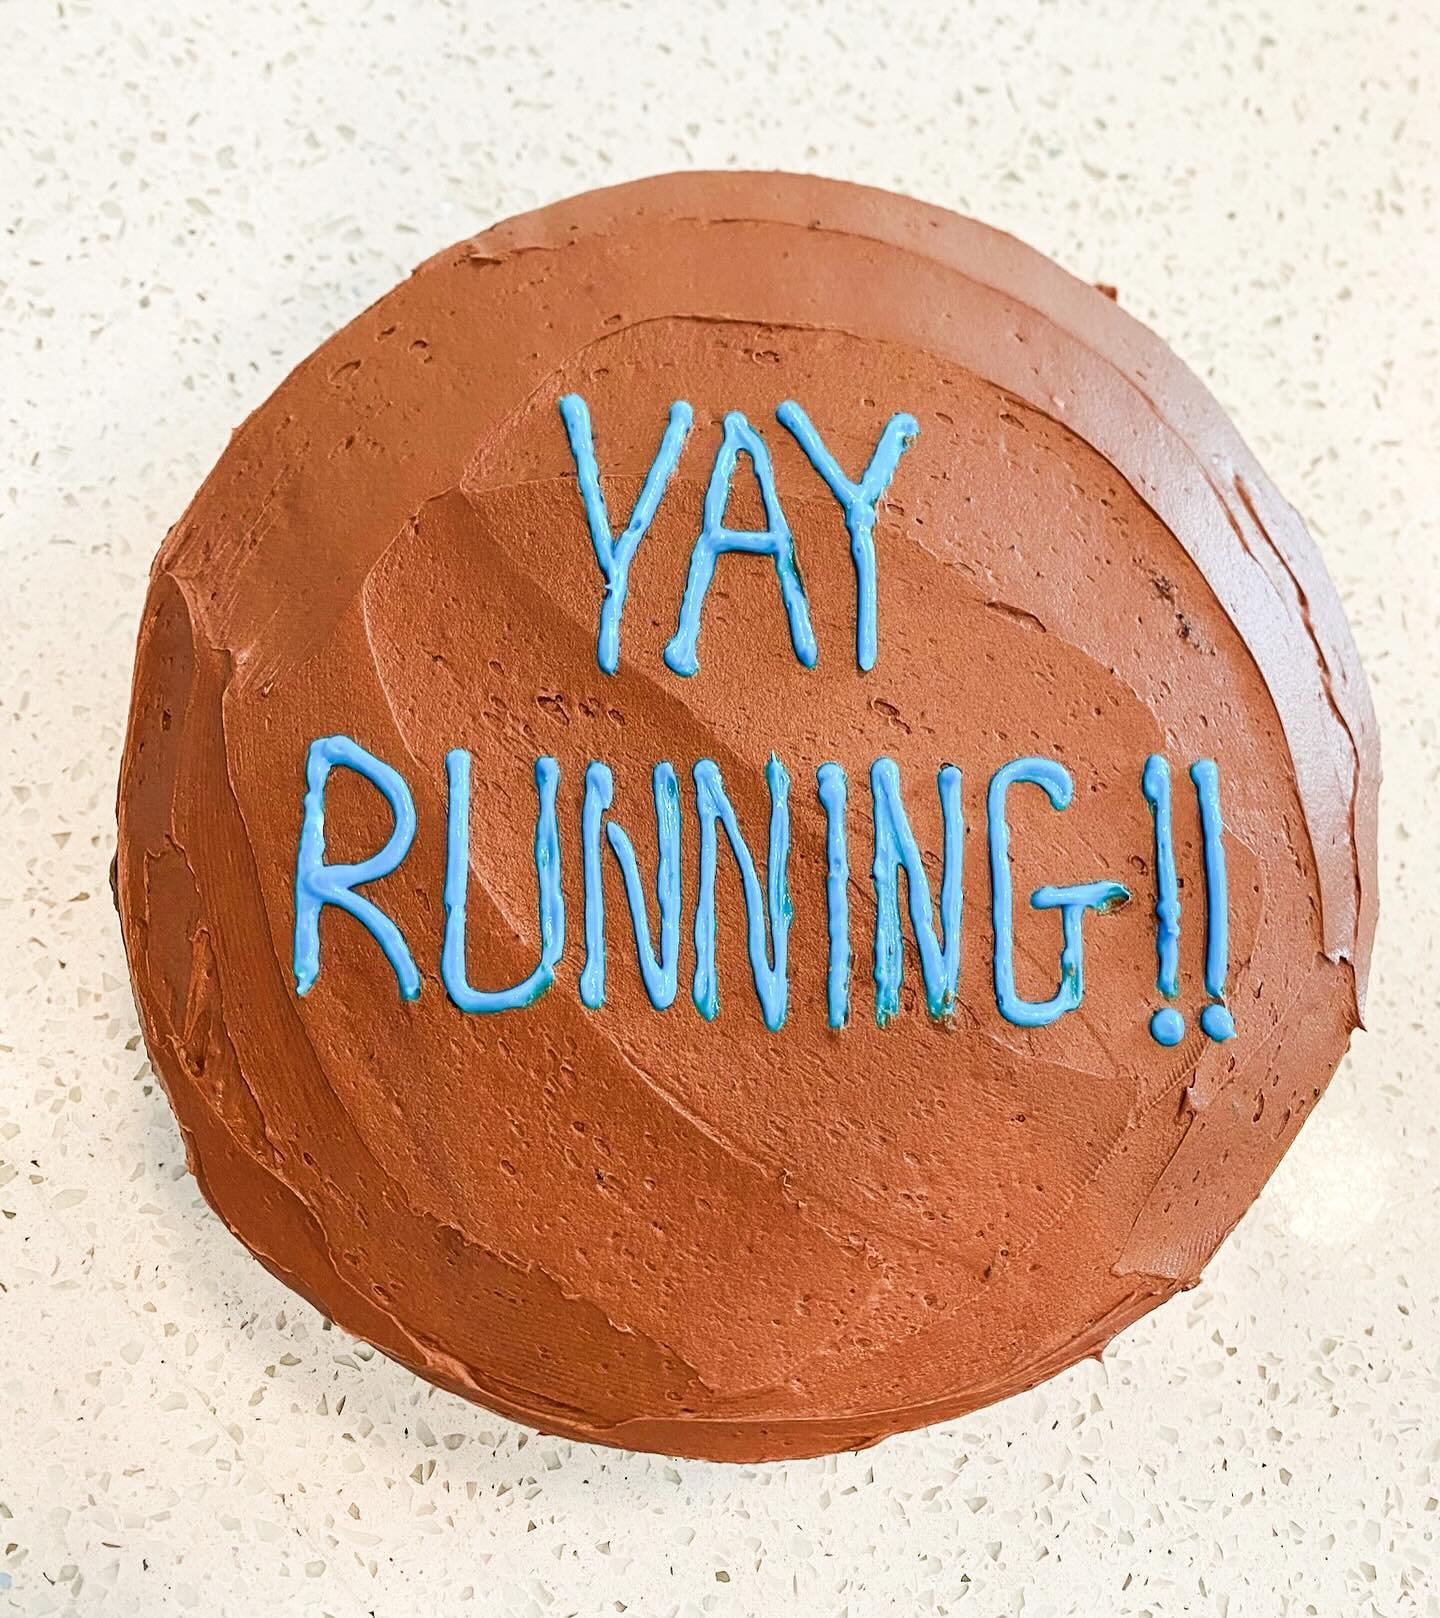 Congrats to everyone who ran the PGH marathon!
We celebrated with @thebearfx&rsquo;s insanely chocolate-y cake 🤩